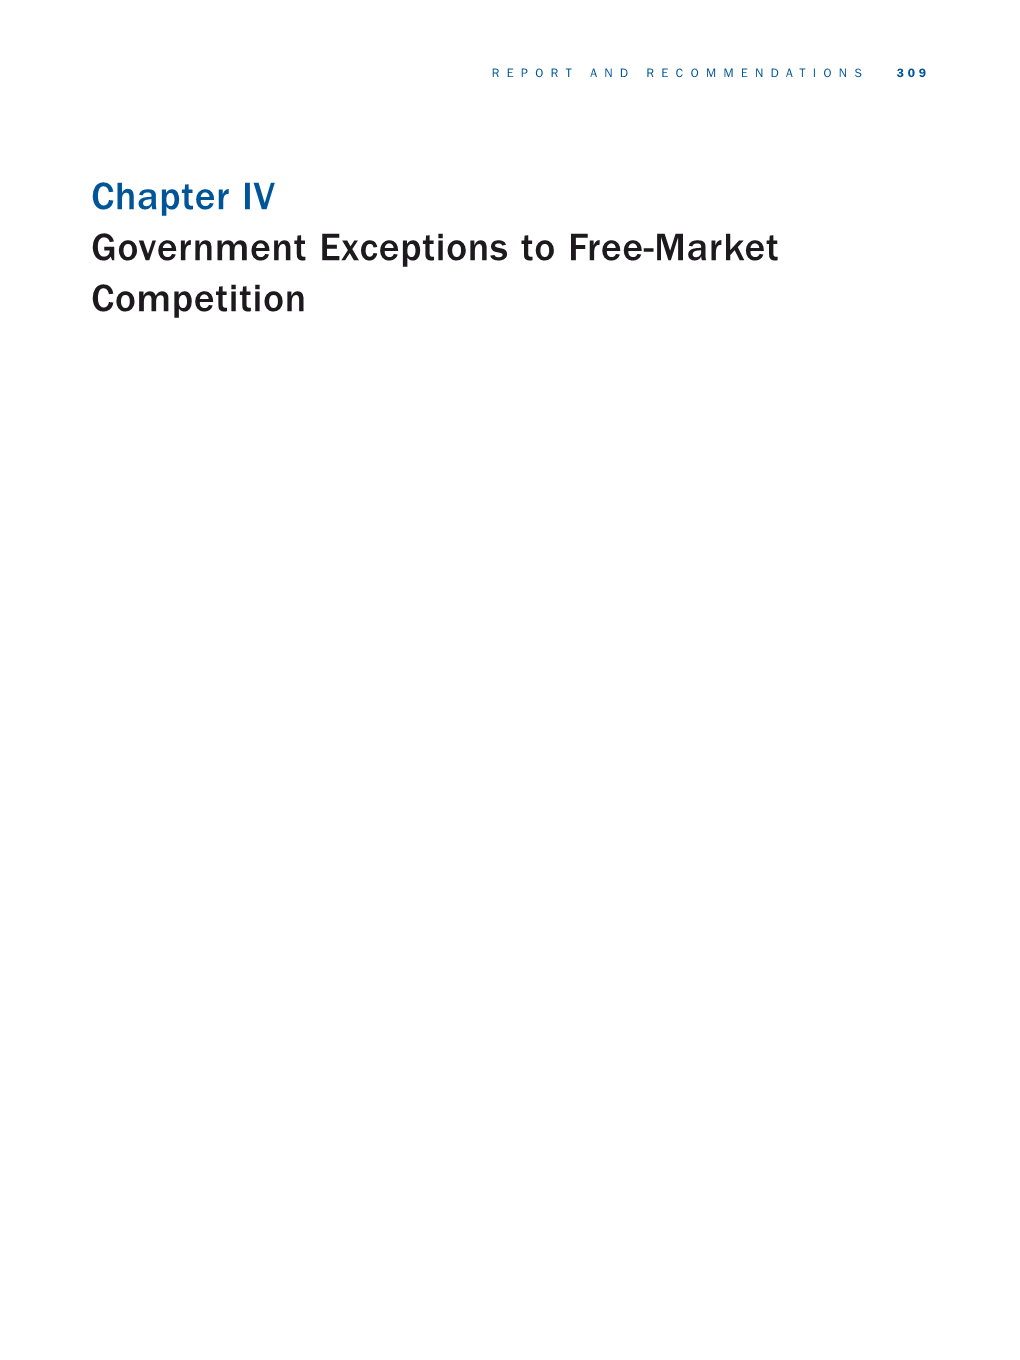 Chapter IV Government Exceptions to Free-Market Competition